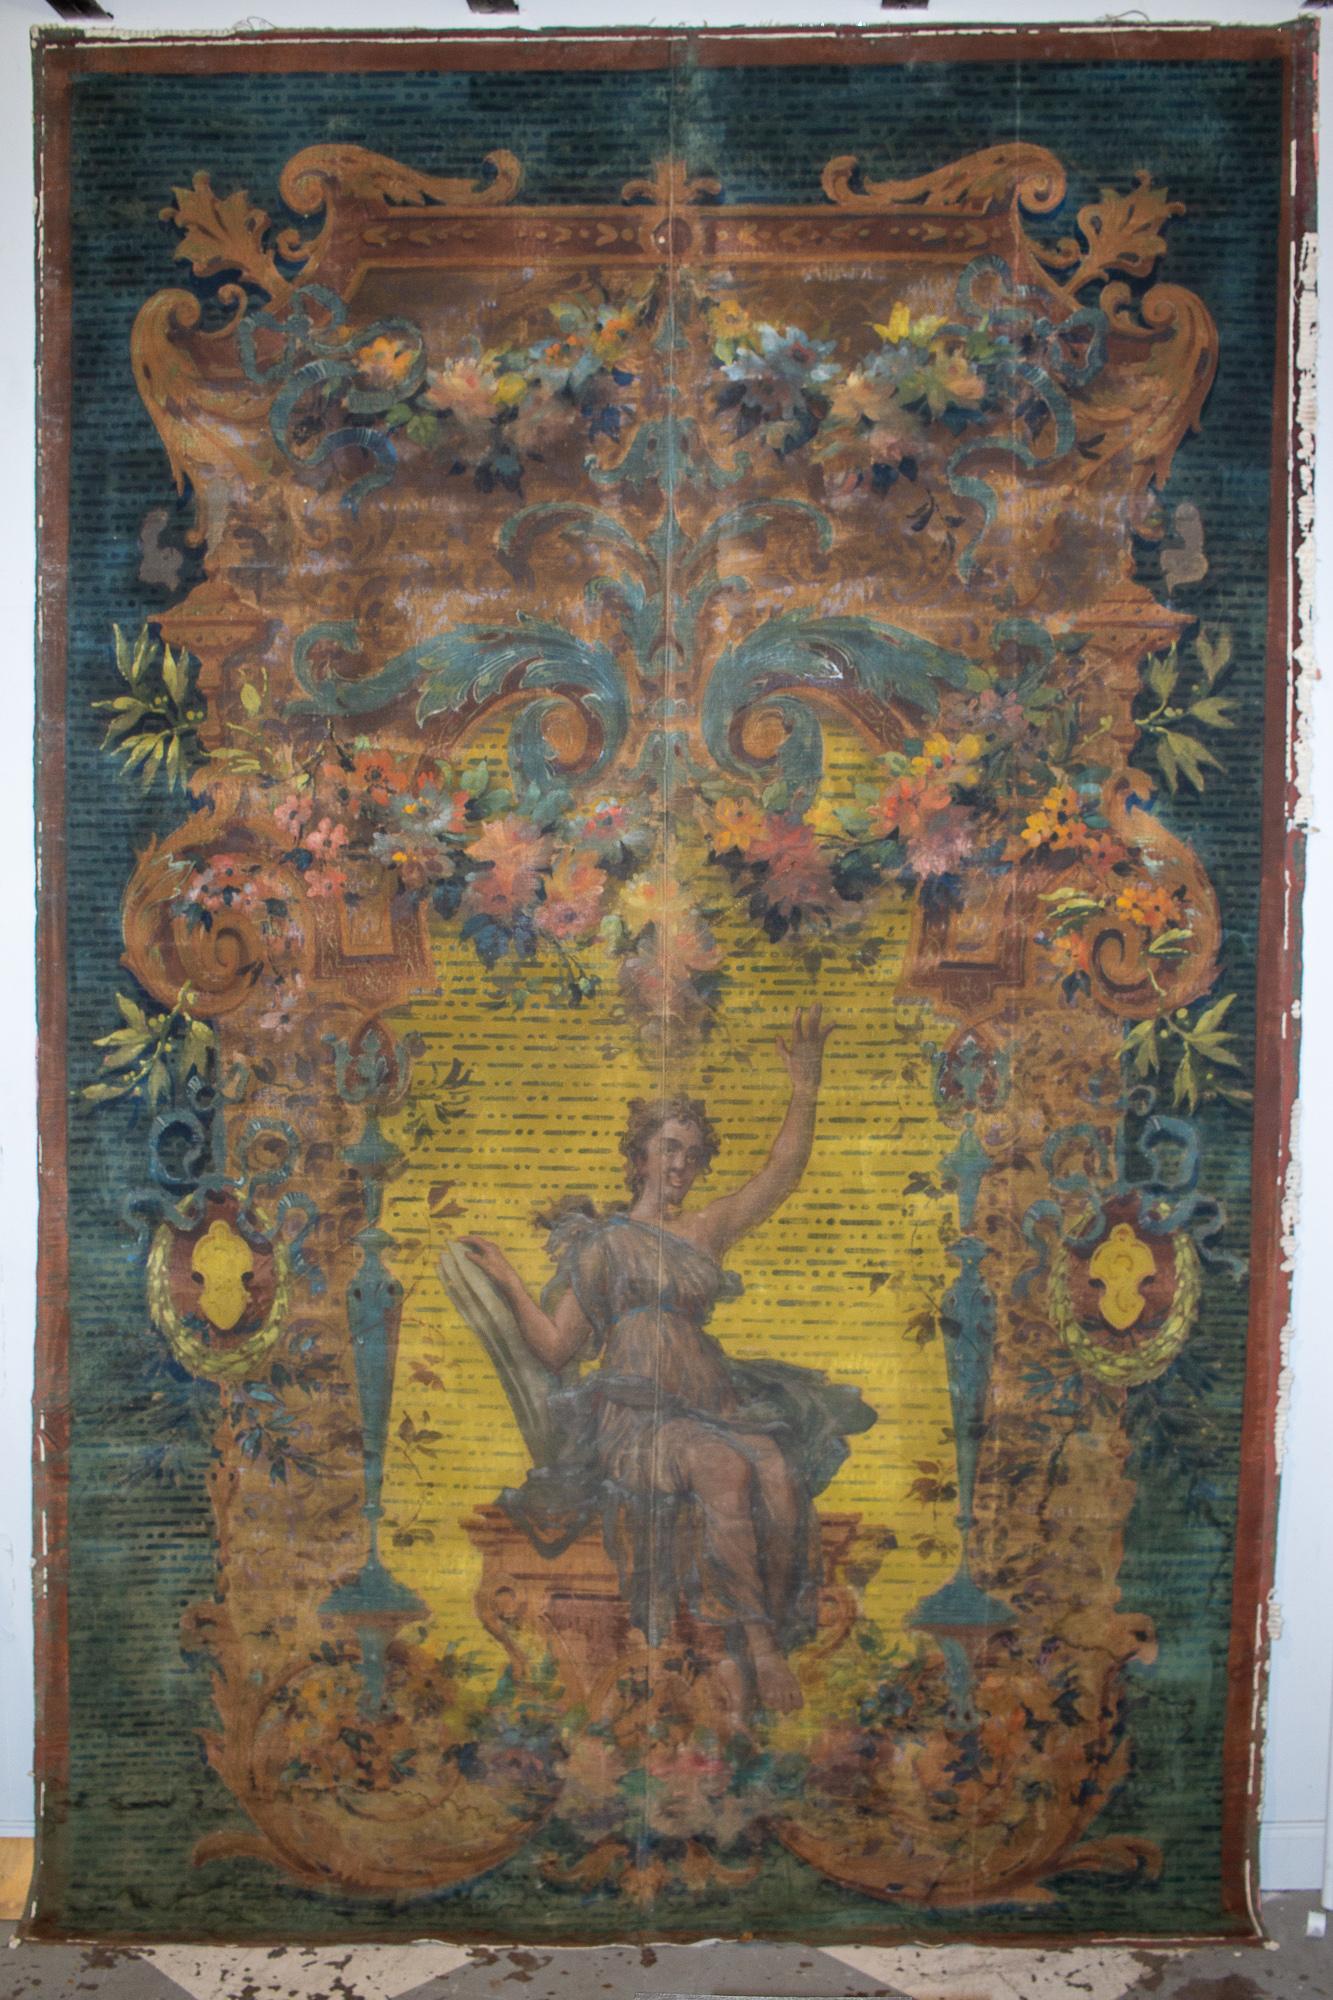 This is an early French Tapestry Cartoon, which would have been used as a guide in weaving tapestries...

Historically, tapestry weavers worked while facing what would be the back of the finished piece. They copied with their colored weft threads